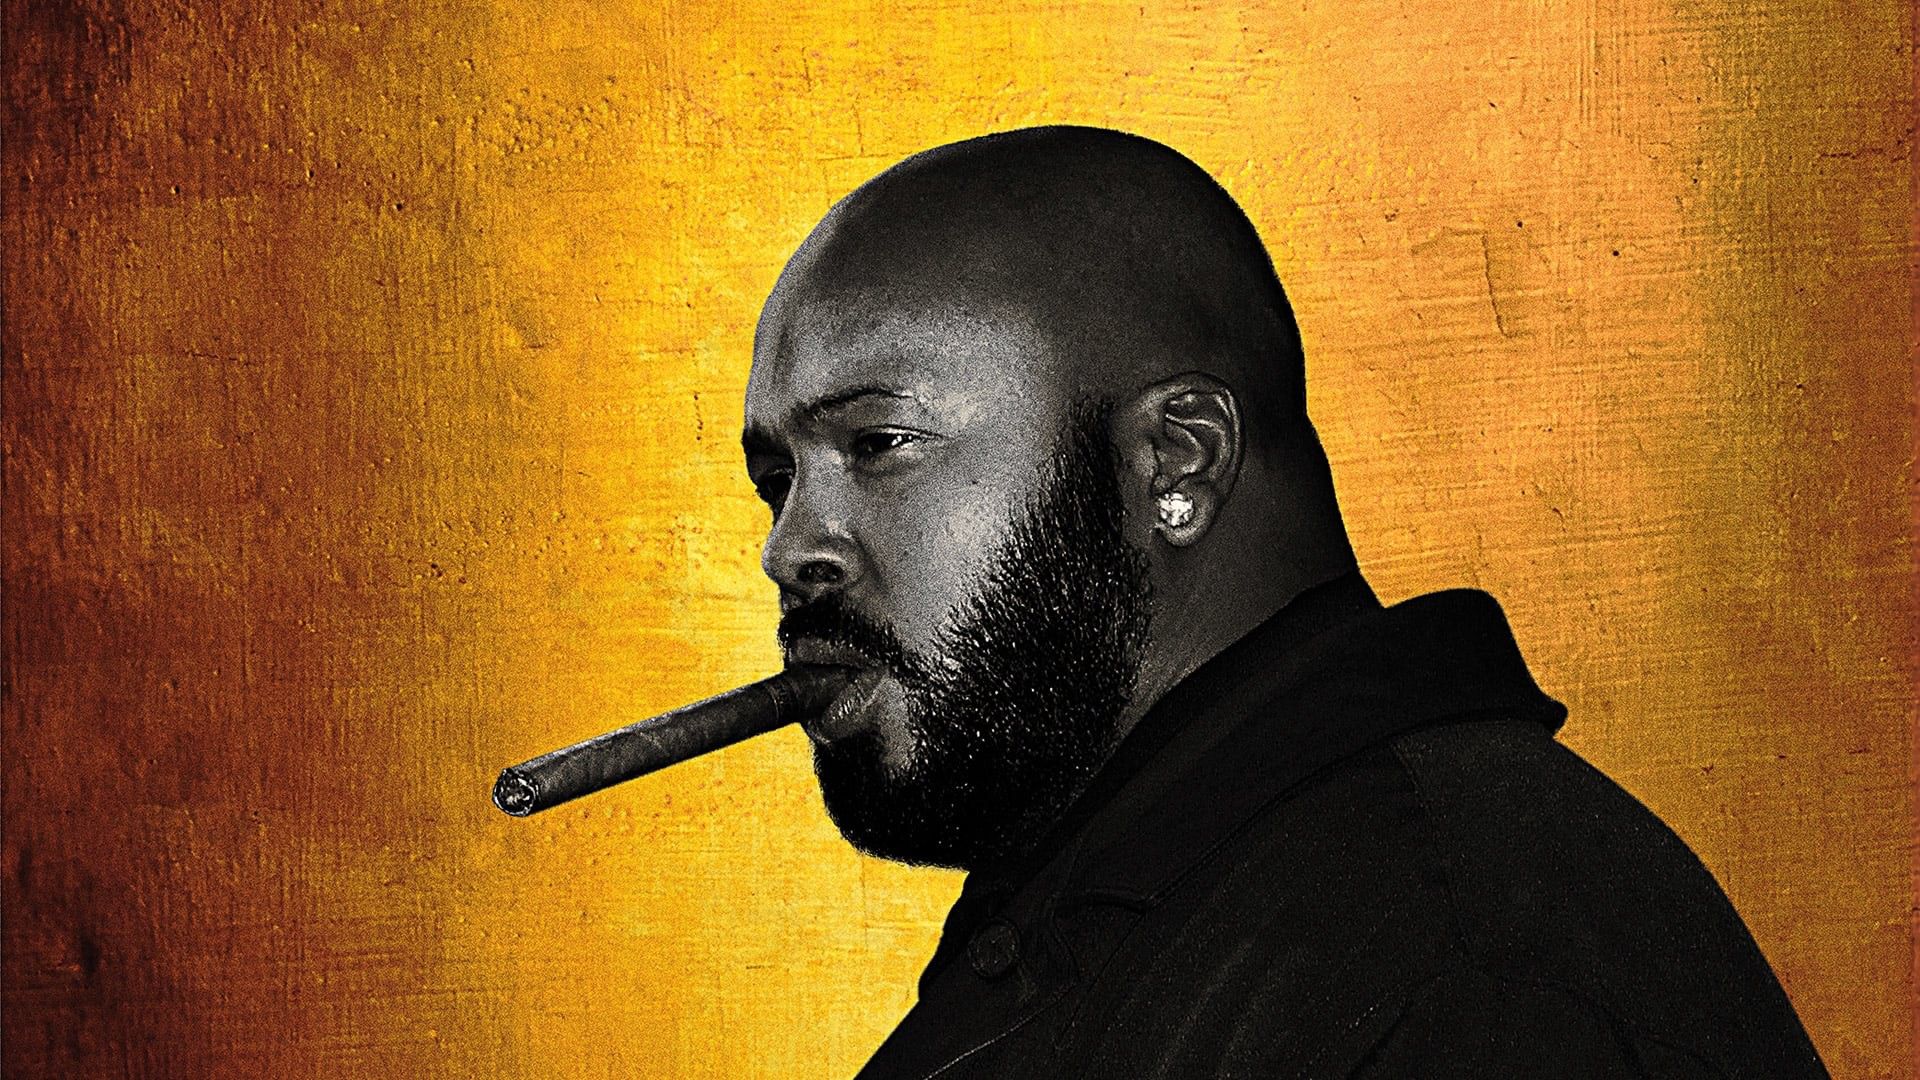 The Most Brutal Assaults of Suge Knight.